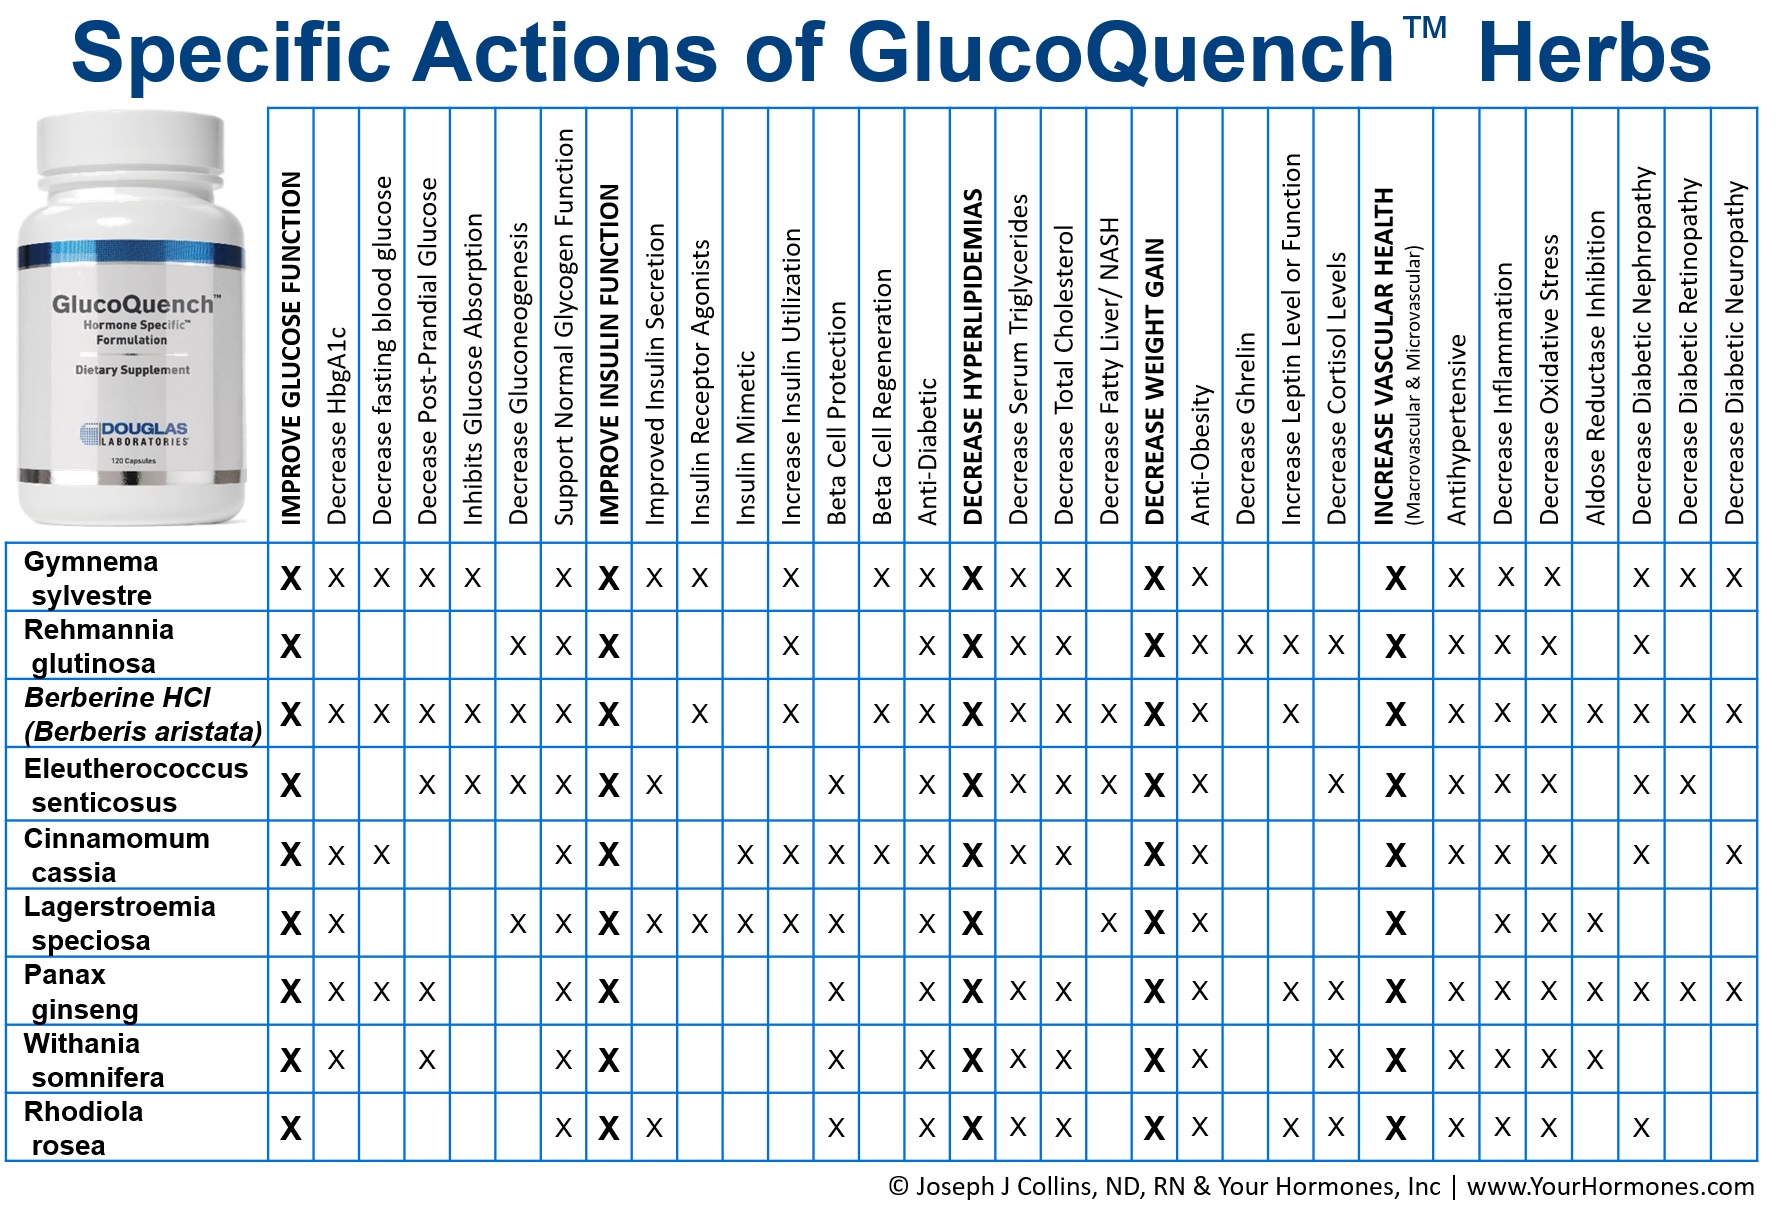 Specific Actions of Herbs in GlucoQuench™